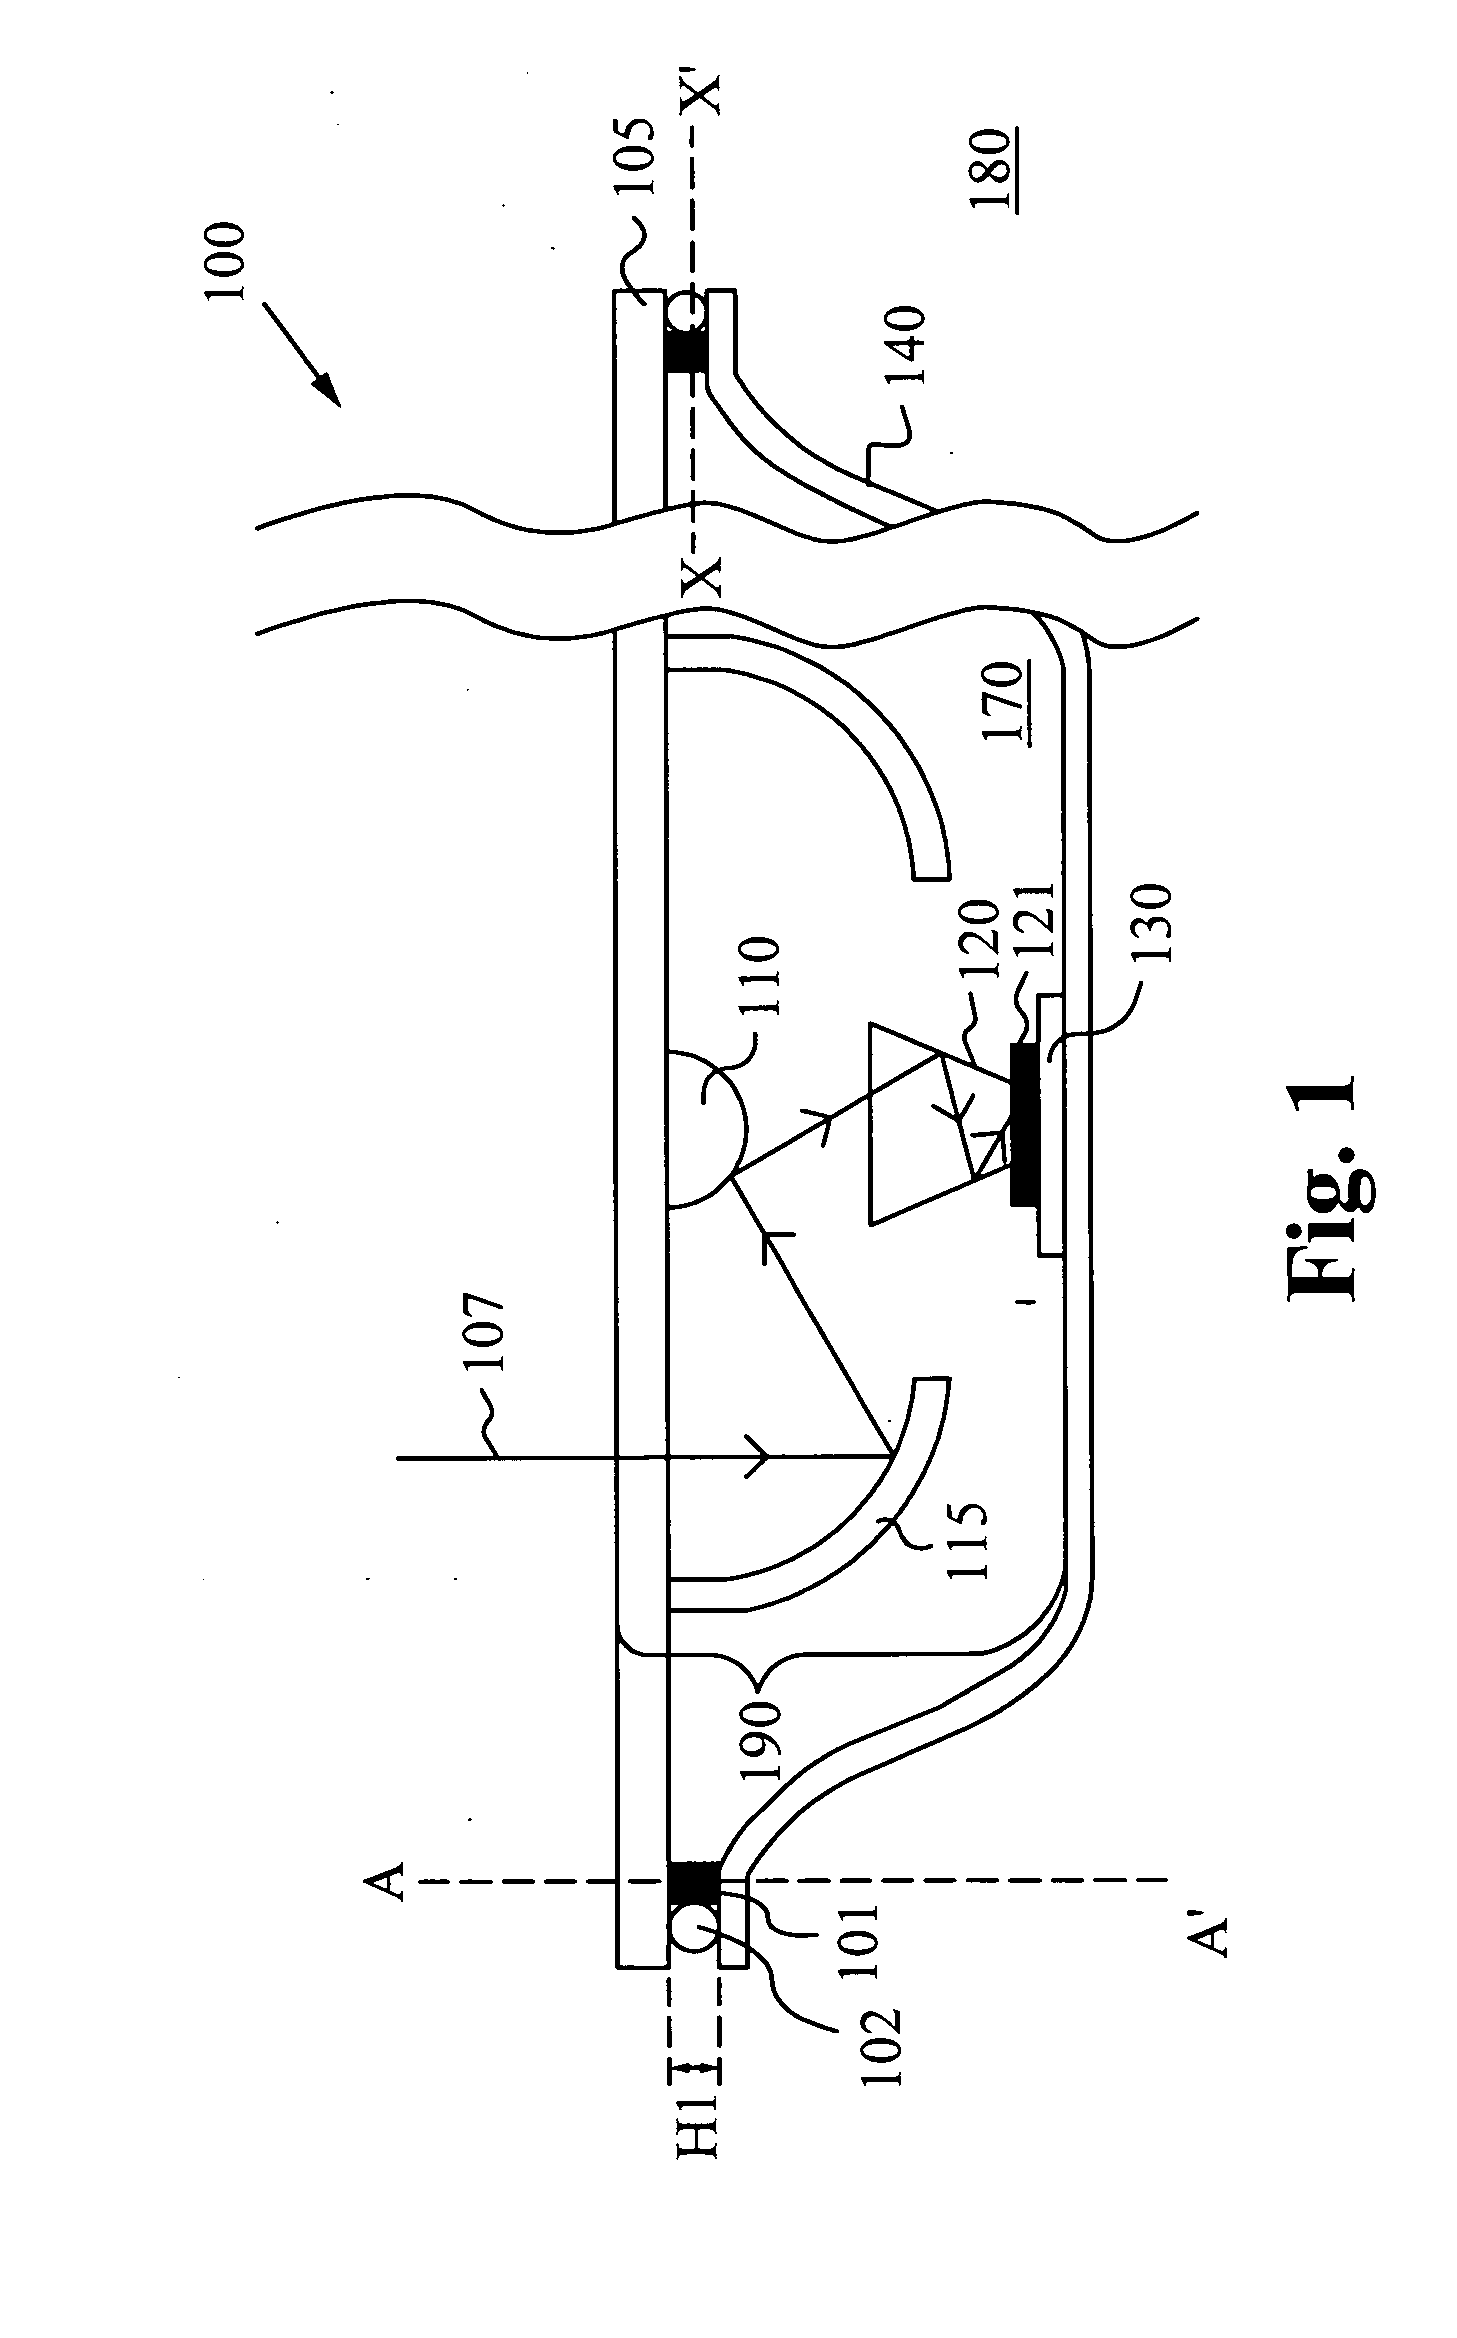 Environmental condition control for an energy-conversion unit